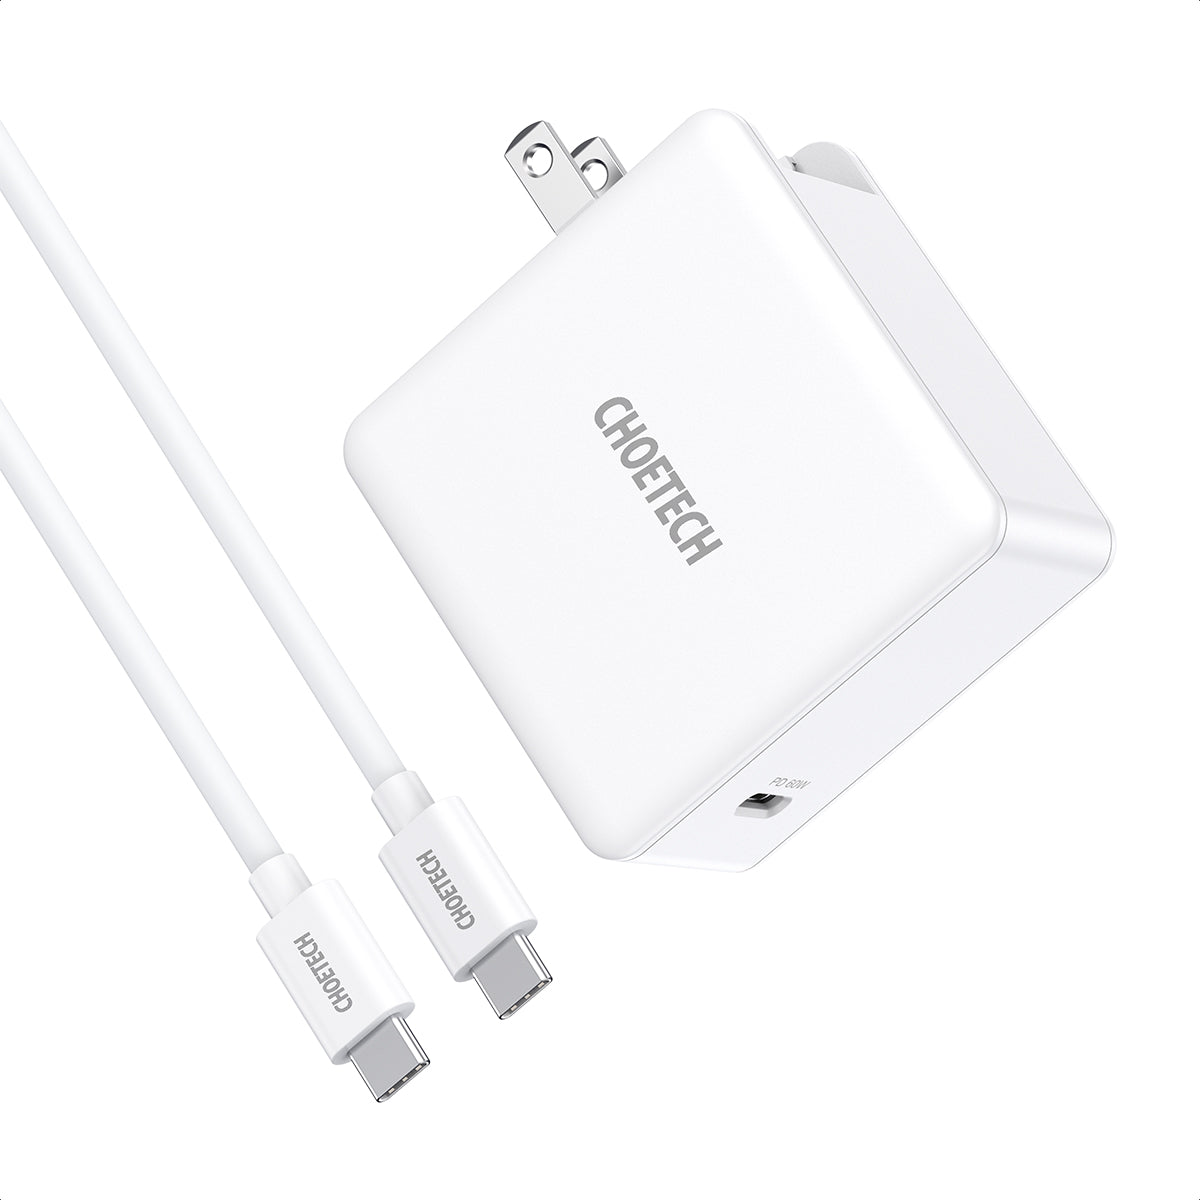 Q4004 Choetech 60W USB C Charger PD Wall Charger Power Adapter with USB C Cable